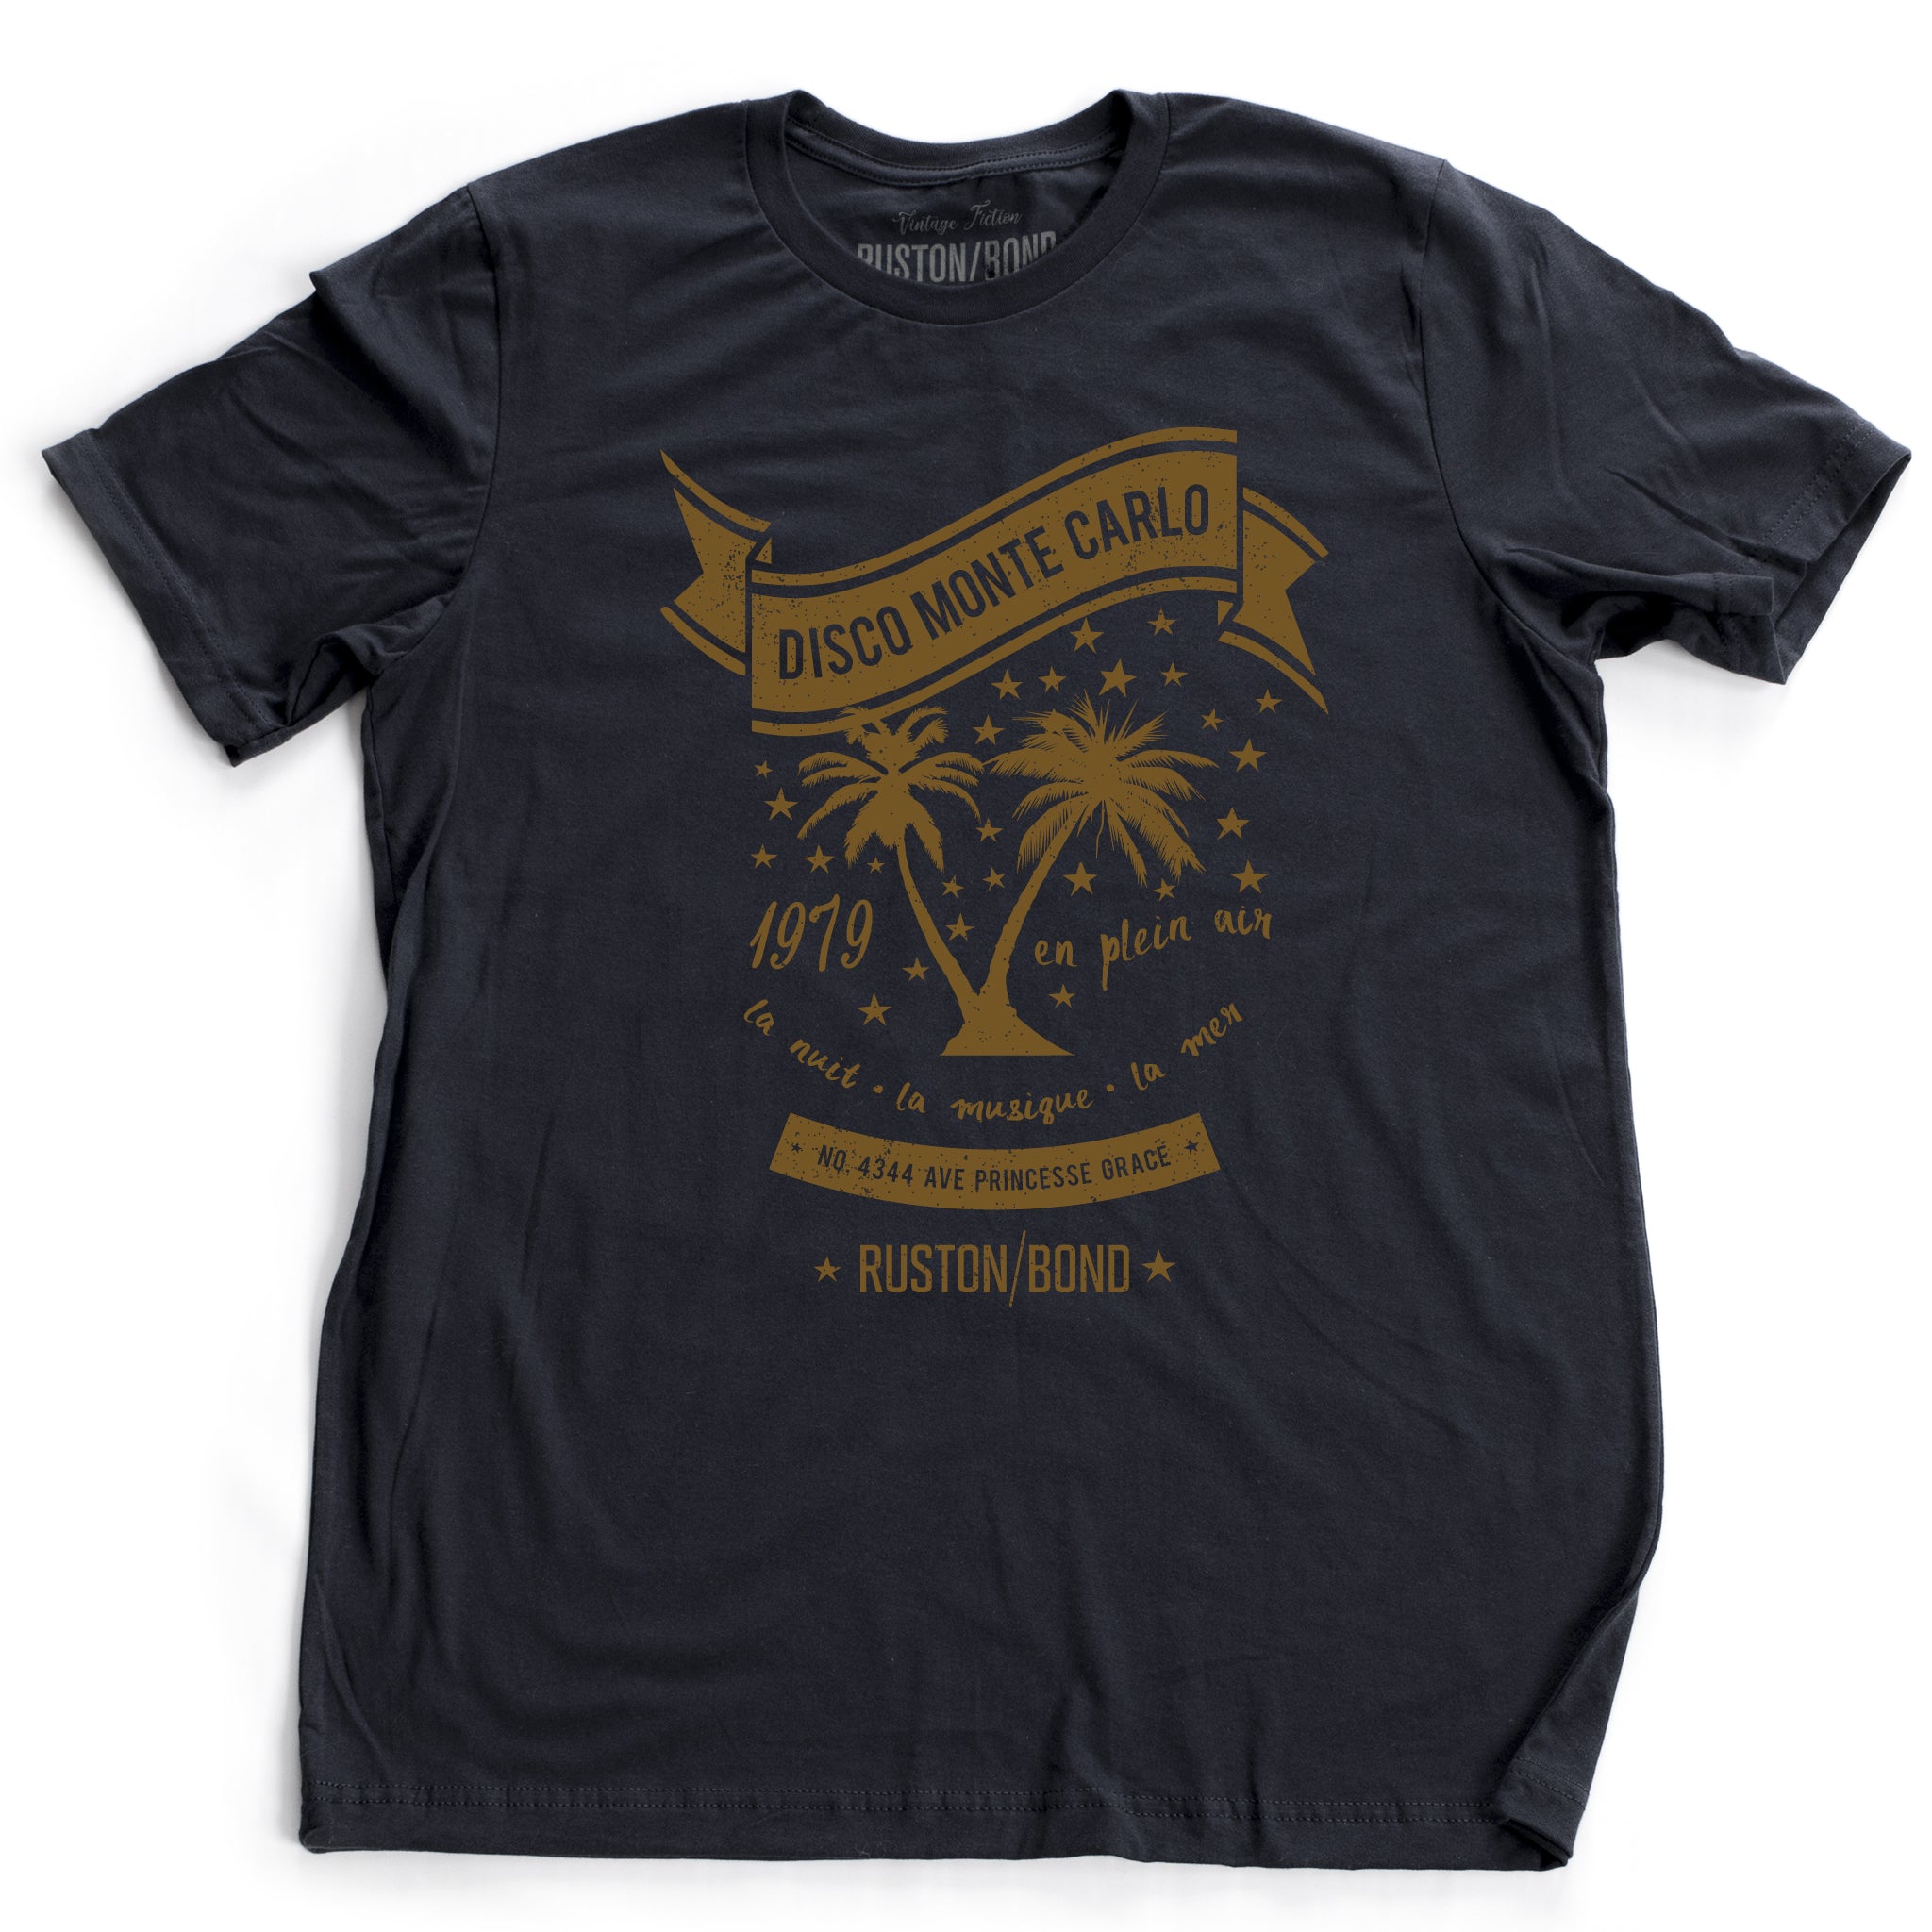 A retro, vintage-inspired t-shirt in navy blue, featuring palm trees against a starry sky, promoting a fictional Monte Carlo discotheque from the 1970s and 80s. By fashion brand Ruston/Bond, from wolfsaint.net